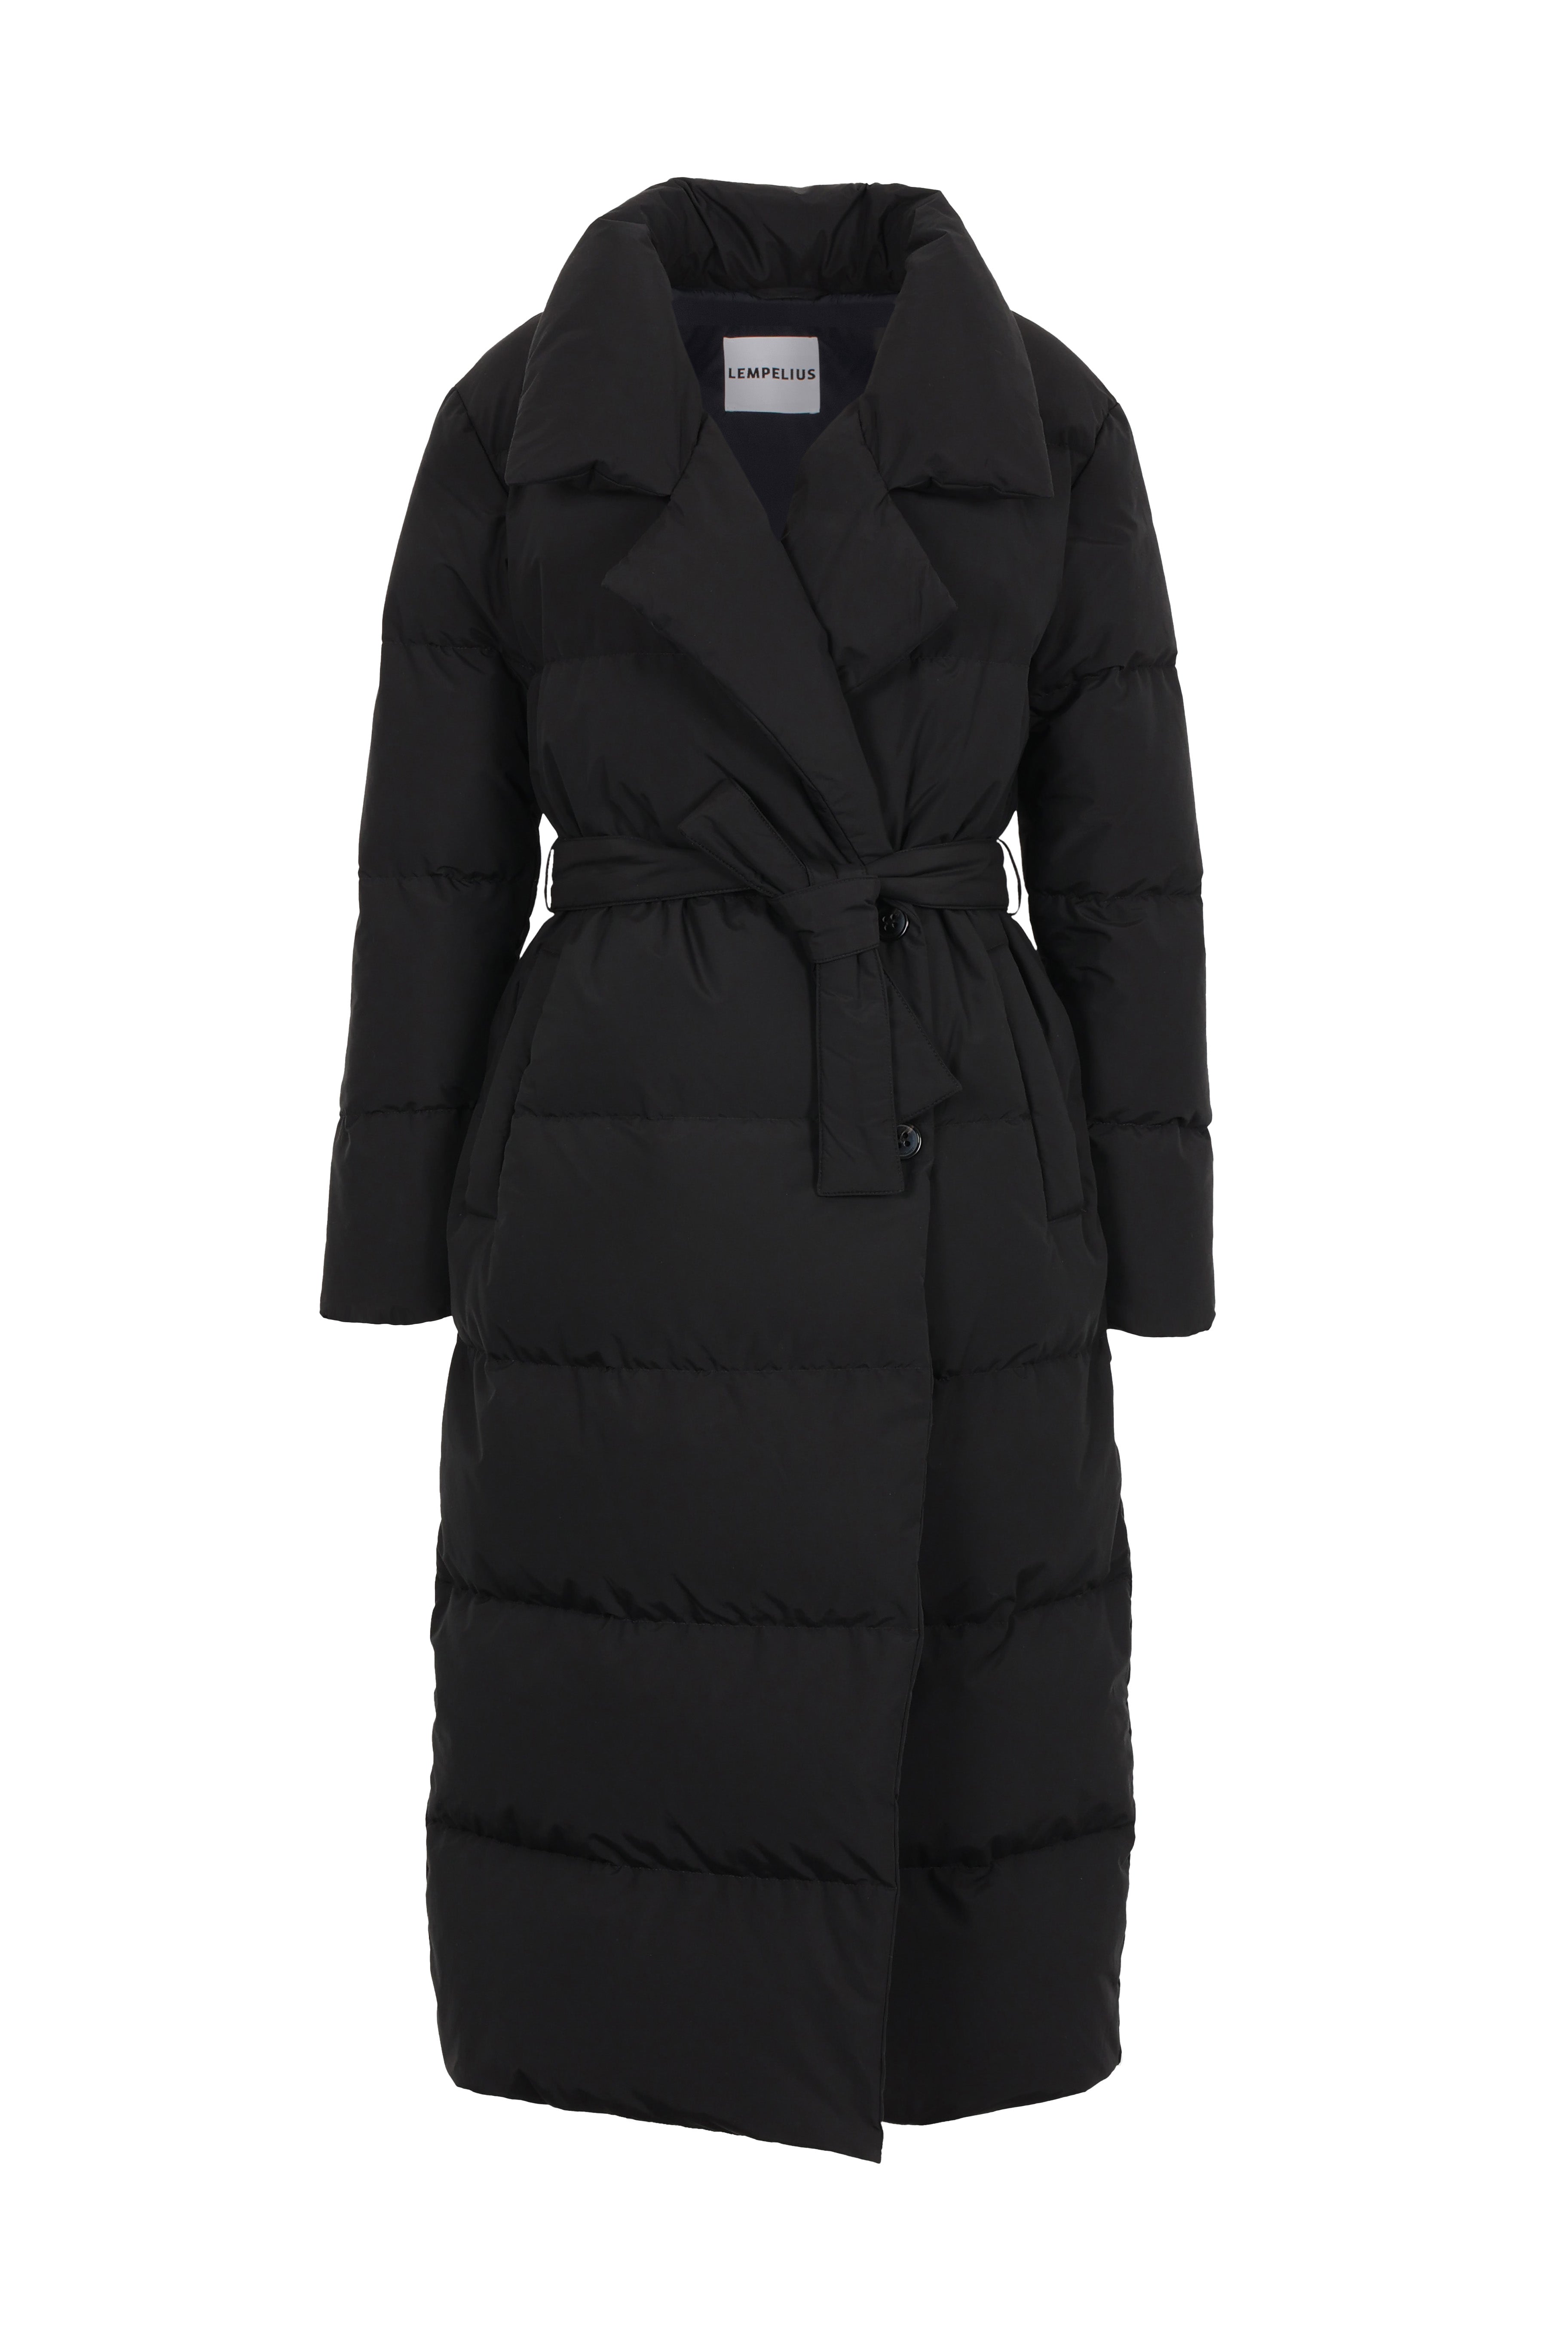 Long belted Lempelius Downcoat in the color black 